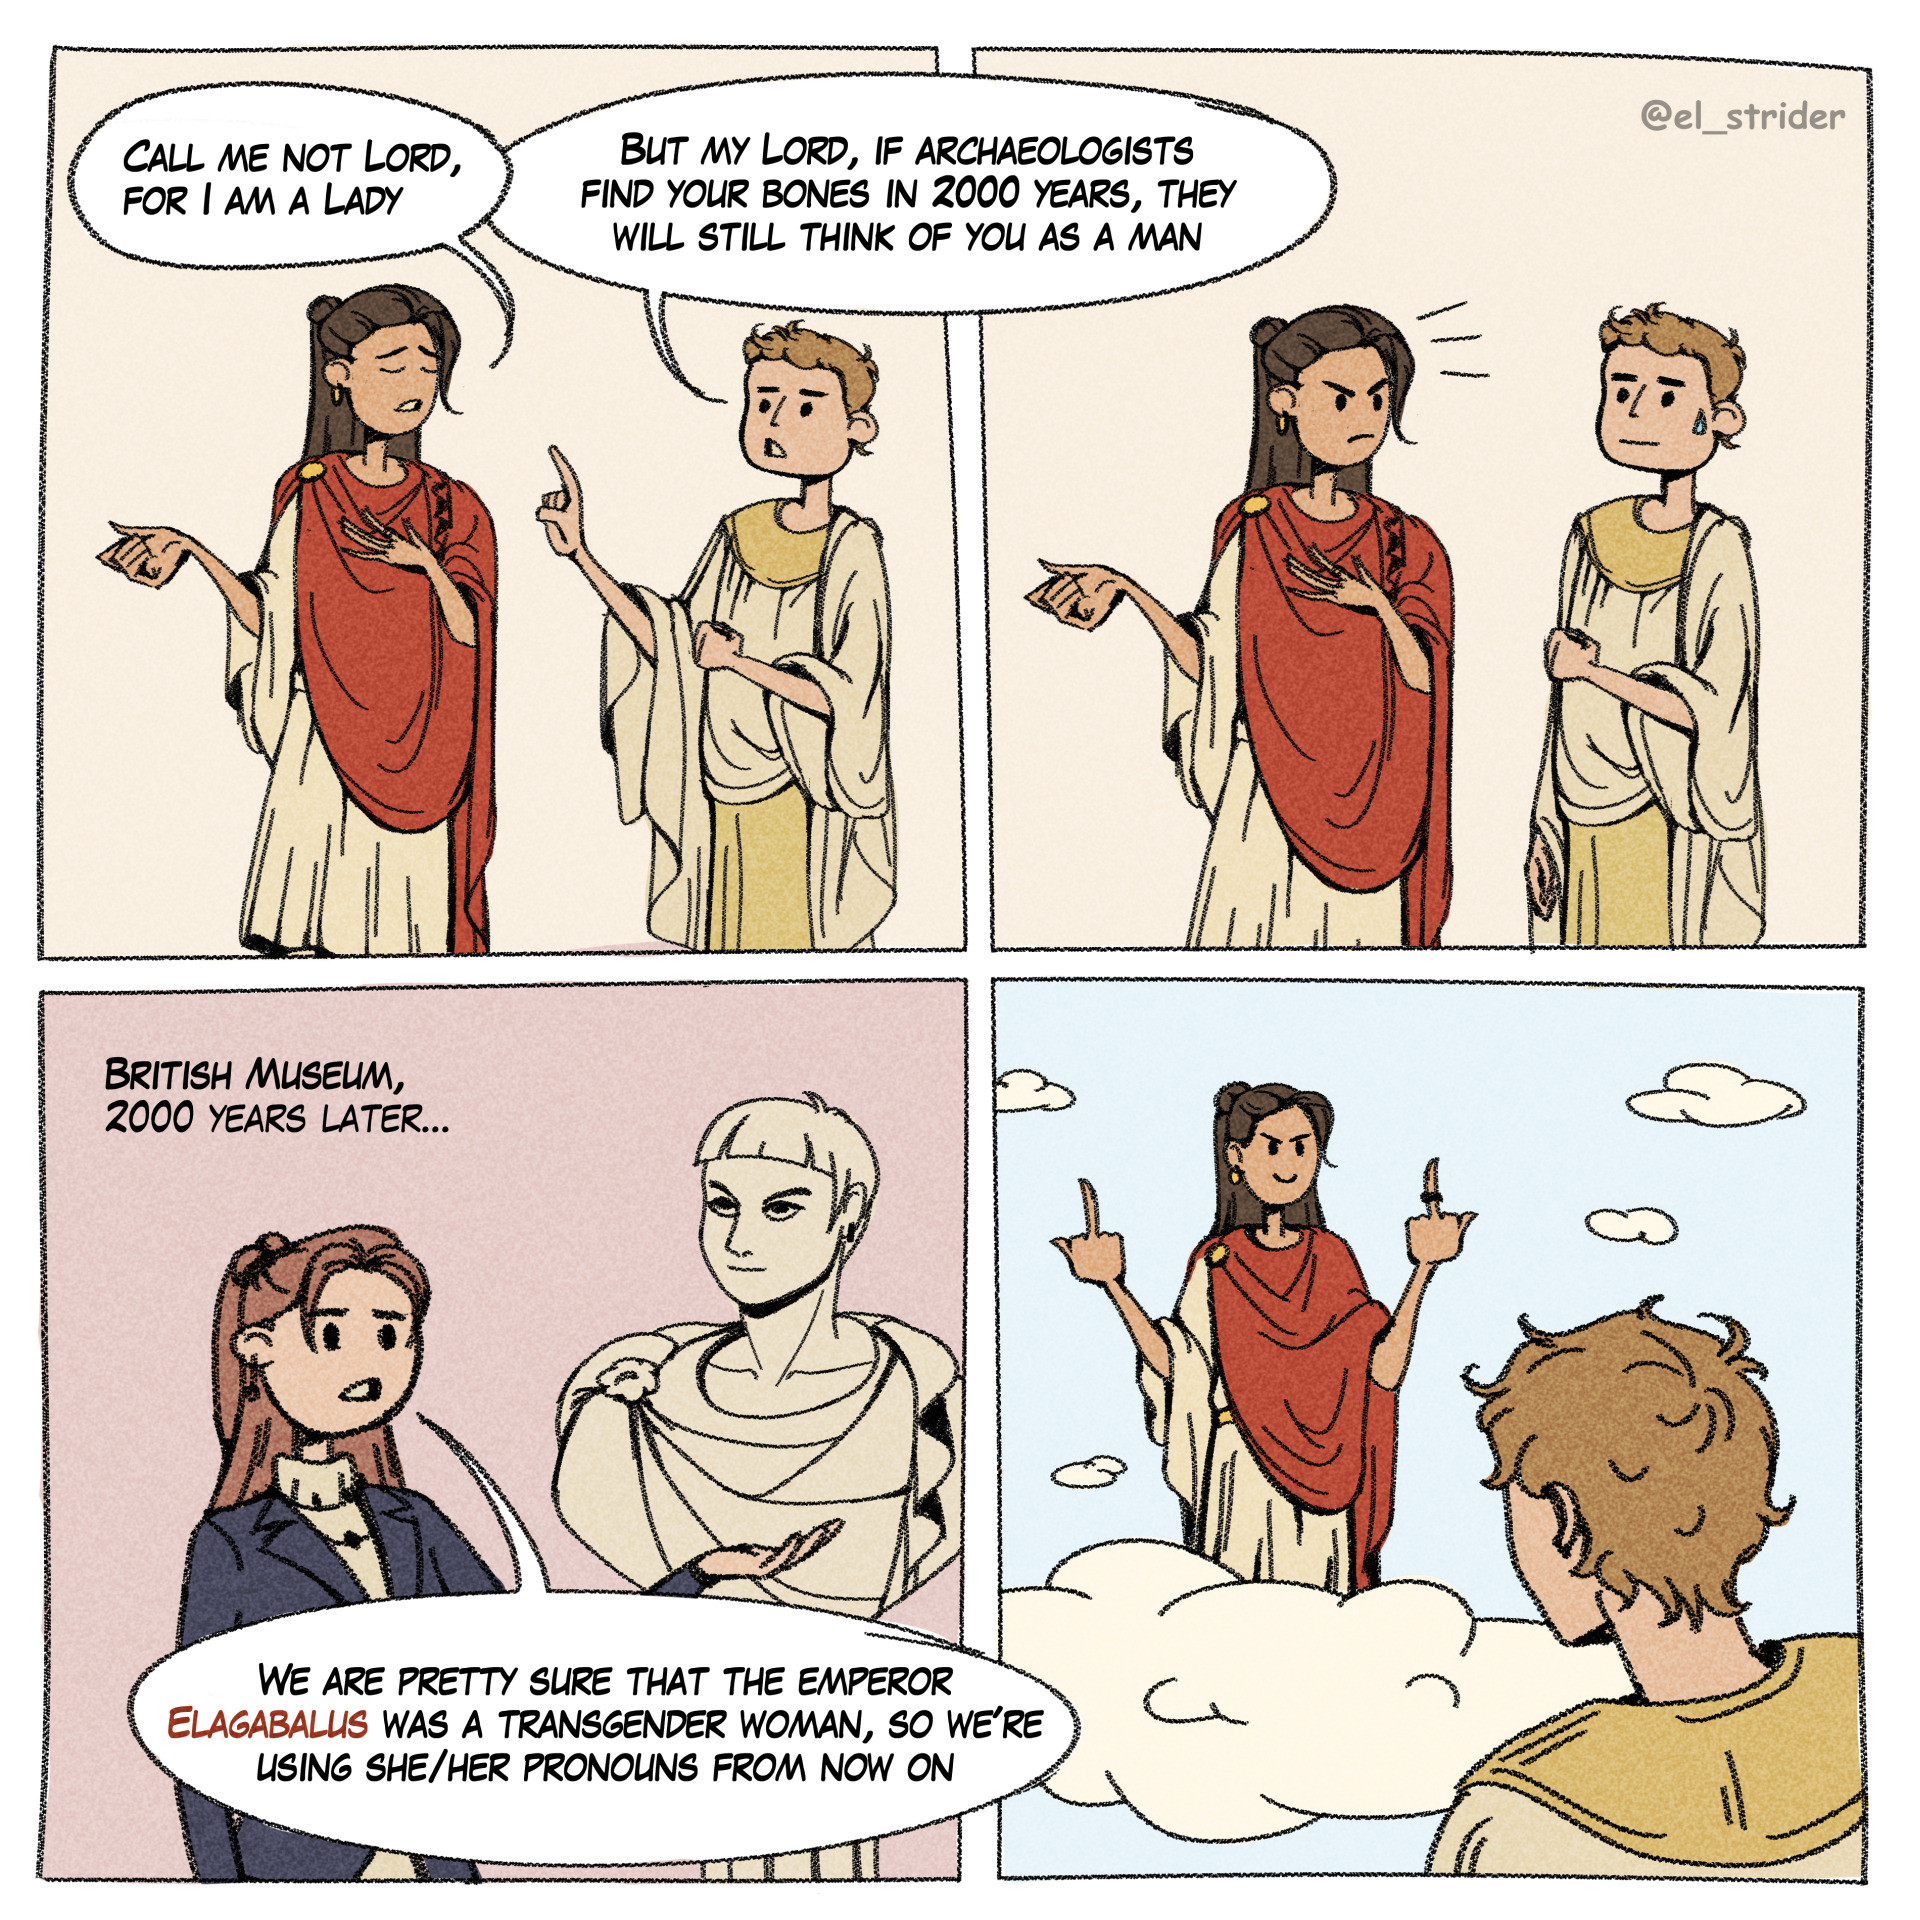 Comic panels. First one showing Emperor Elagabalus saying "Call me not lord, for I am a lady" and a random Roman replying "but my lord, if archaeologists find your bones in 2000 years, they will still think of you as a man.

Cut to the British Museum 2000 years later and a curator by a bust of Elagabalus says "We are pretty sure that the emperor Elagabalus was a transgender woman, so we're using she/her pronouns from now on.

Final panel has Elagabalus flipping birds at the transphobic guy from before in heaven.